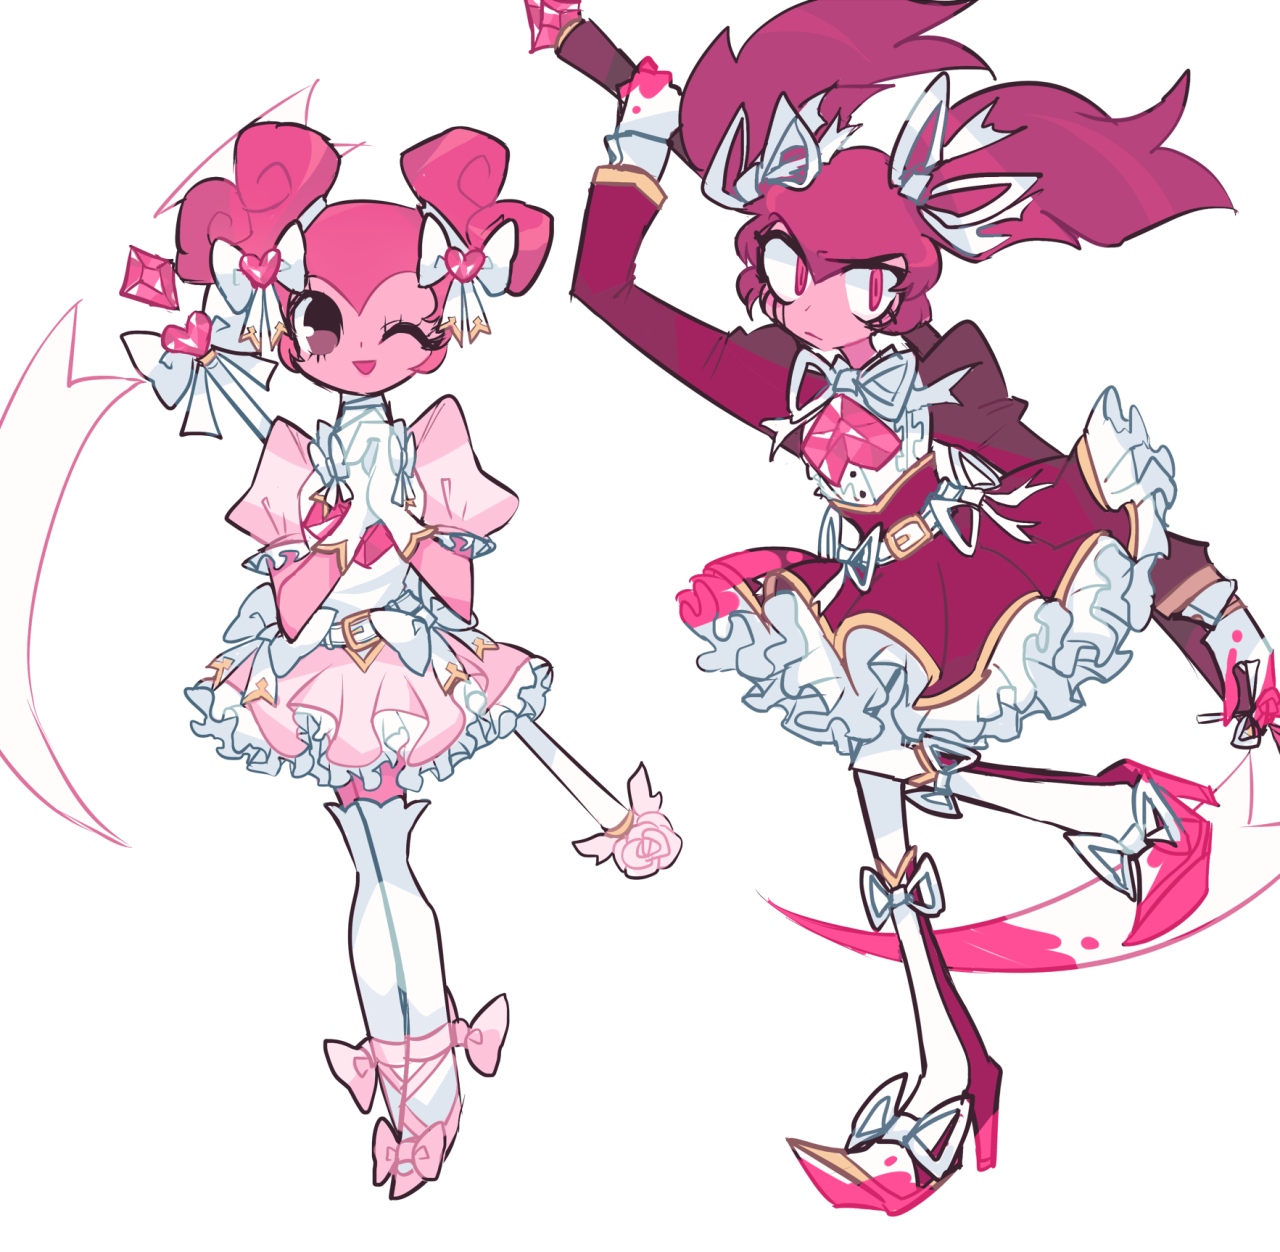 spinel's transformation reminded me of magical girls | Tumblr